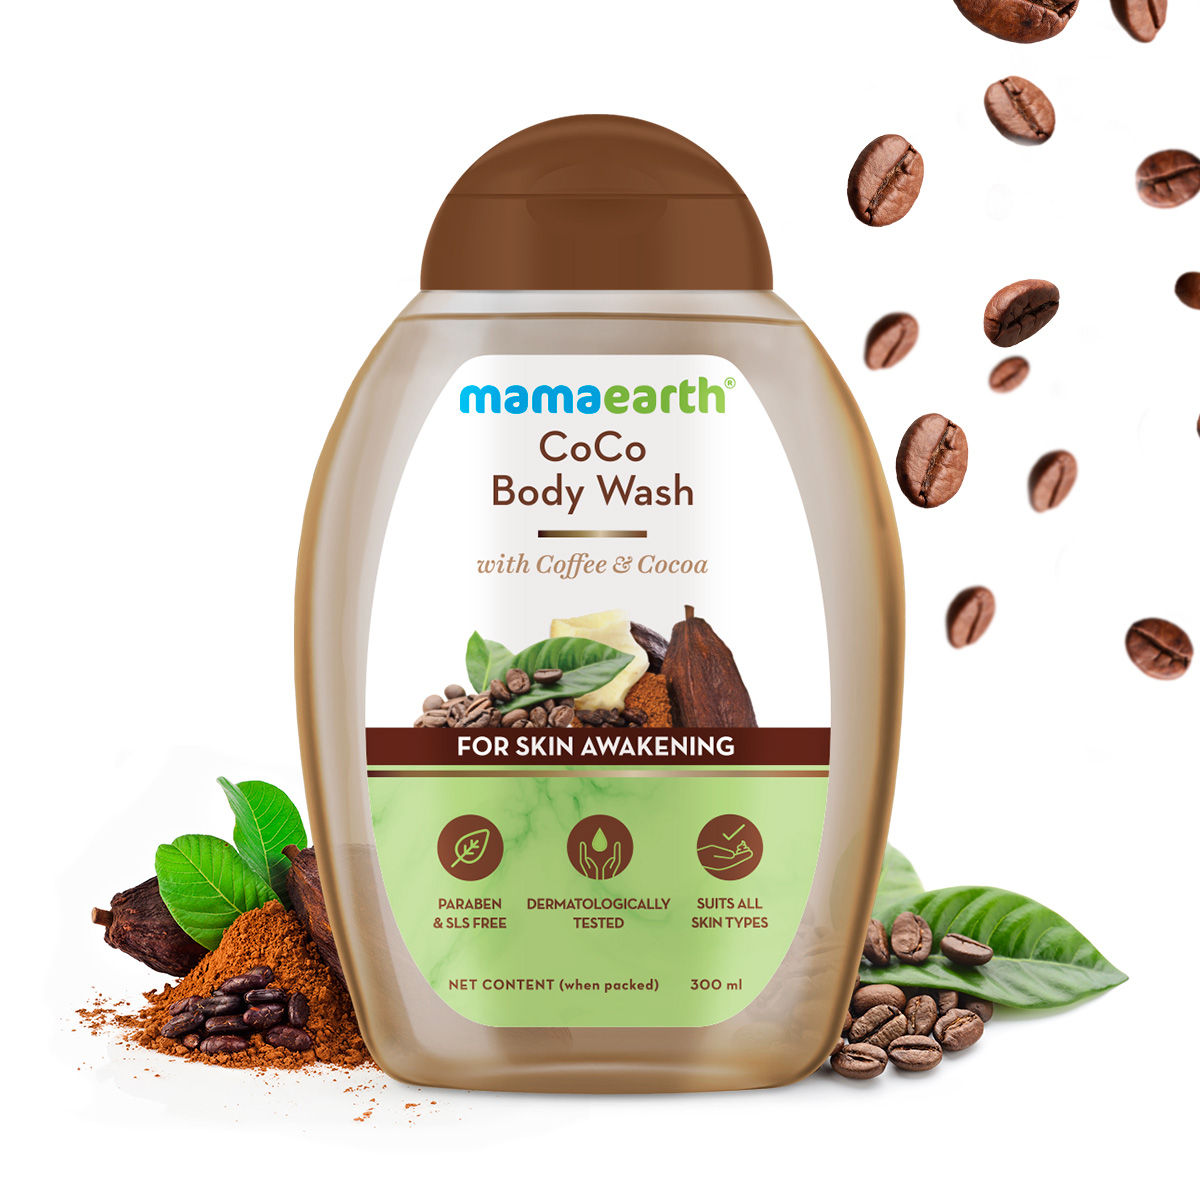 Mamaearth Coco Body Wash With Coffee & Cocoa For Skin Awakening